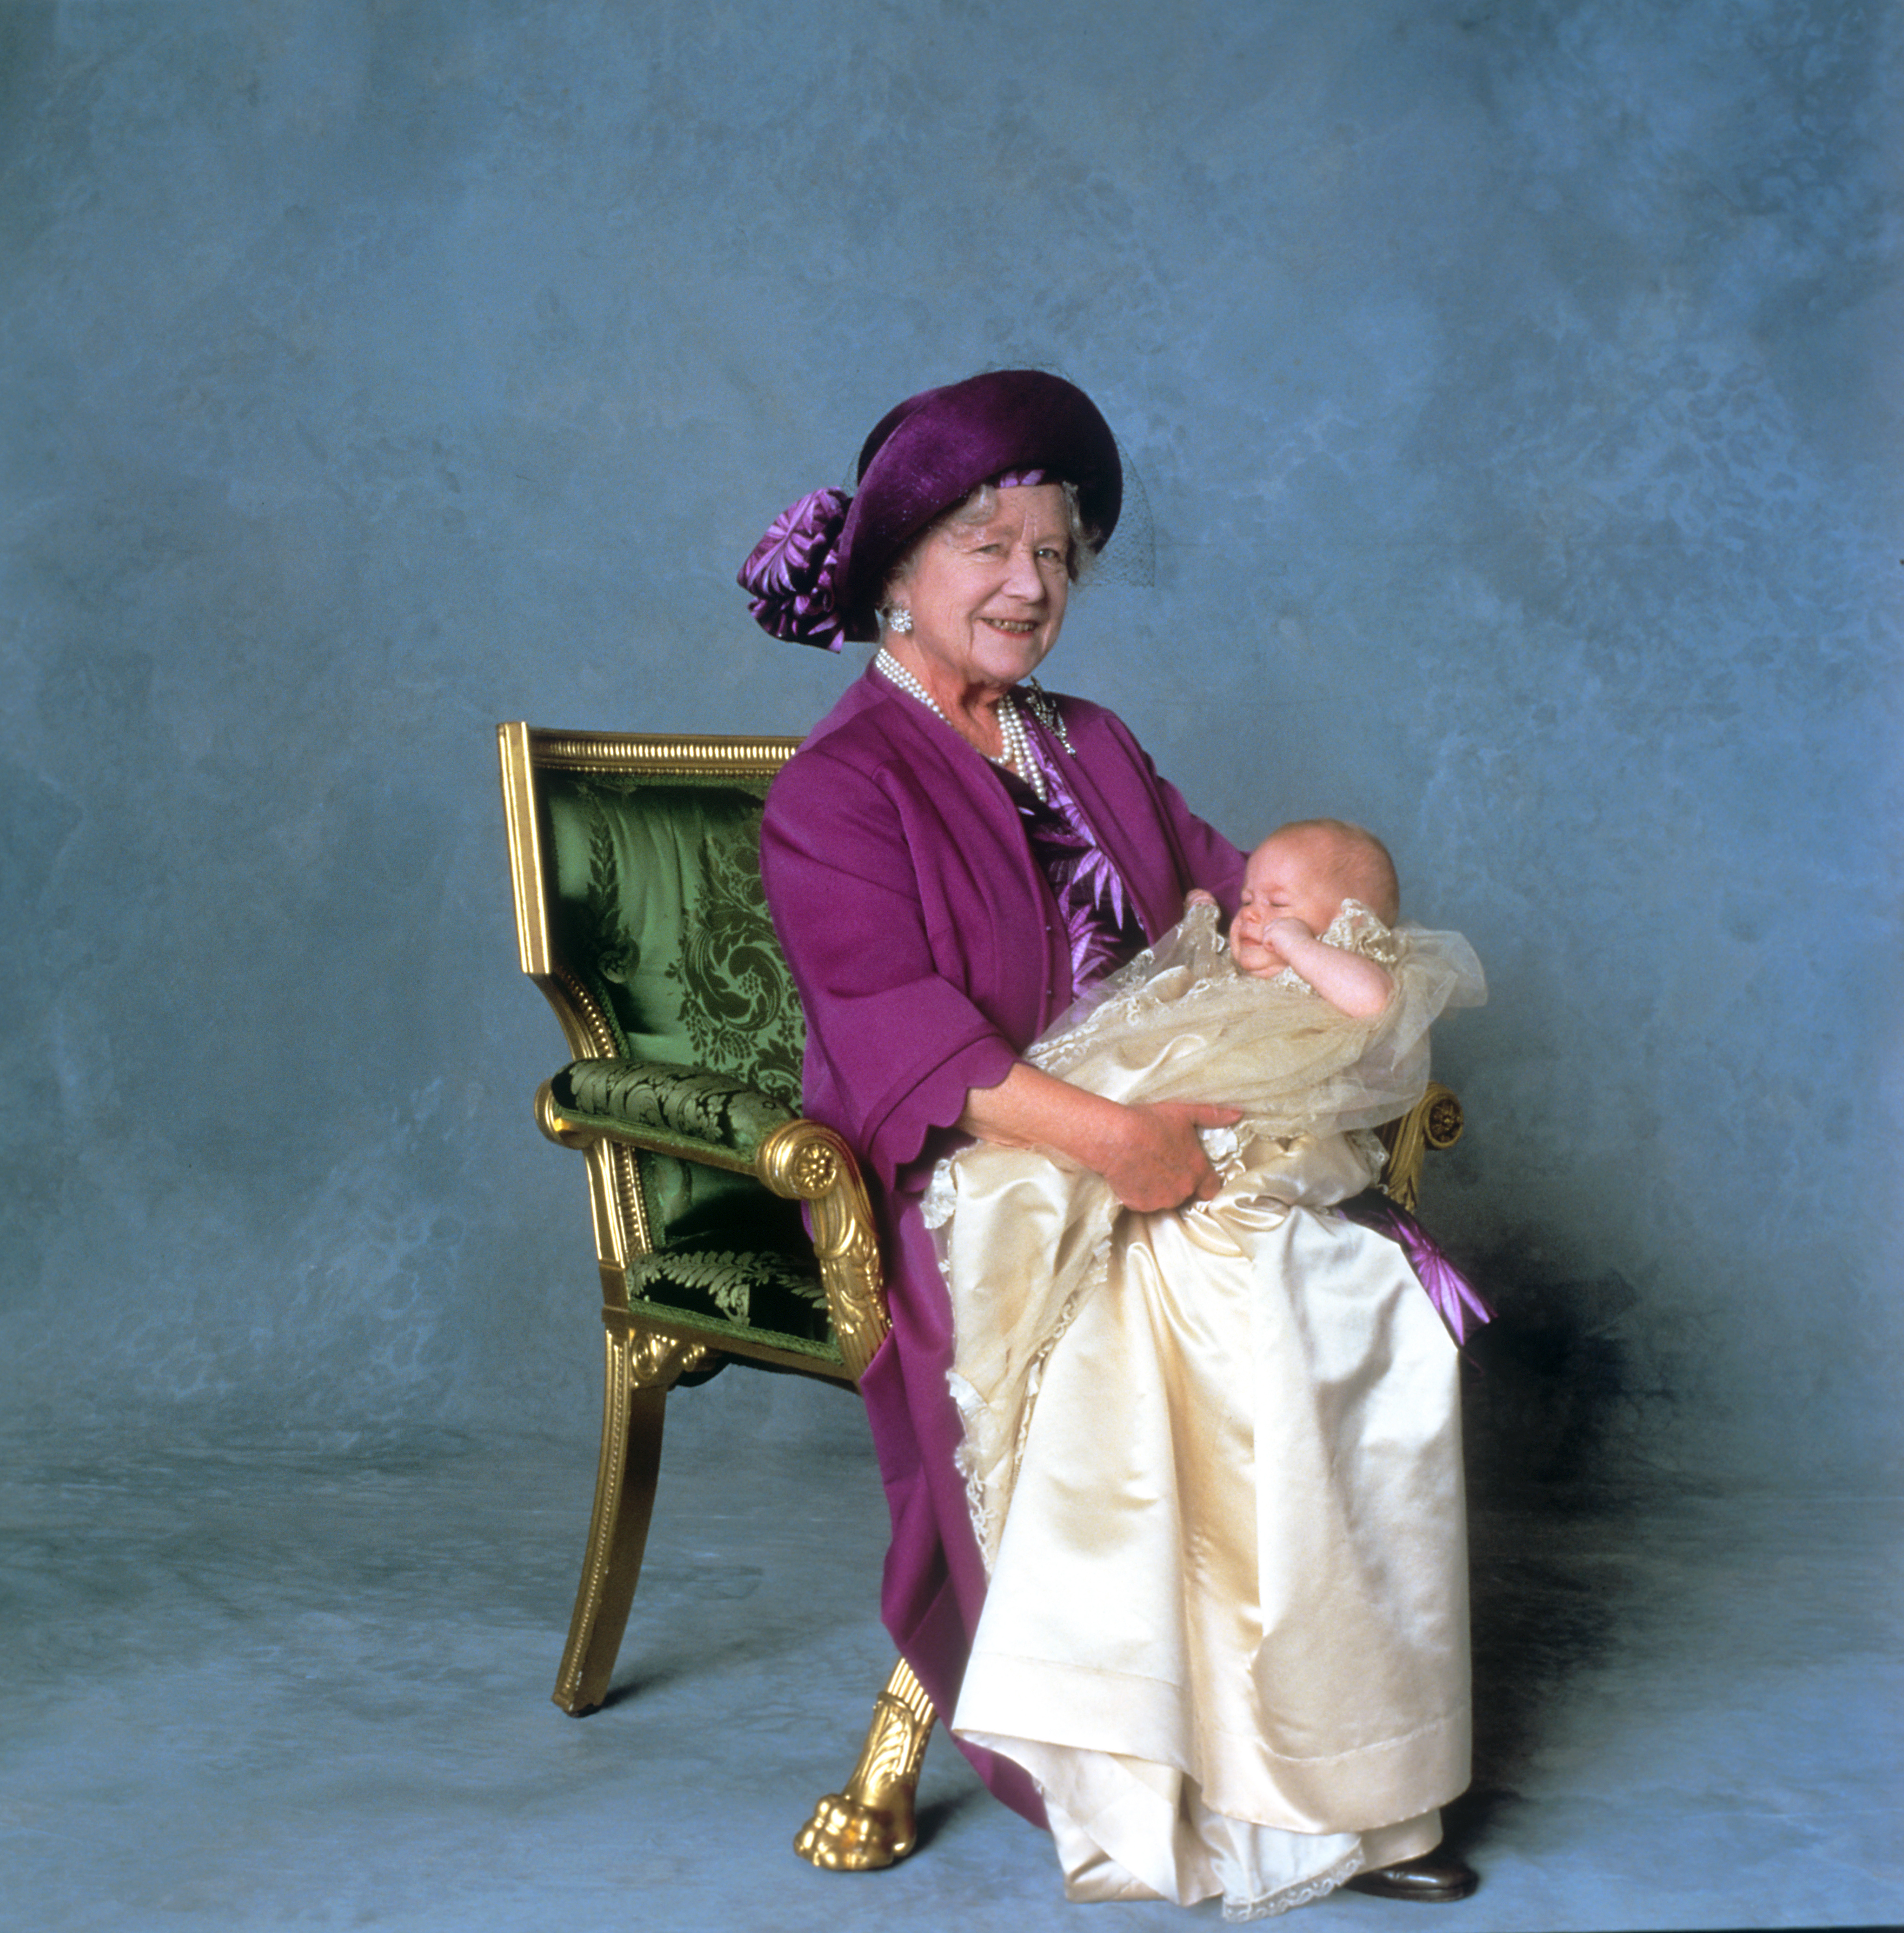 The Queen Mother, Elizabeth Bowes-Lyon and Prince Harry as a baby posing for a picture in 1984. | Source: Getty Images